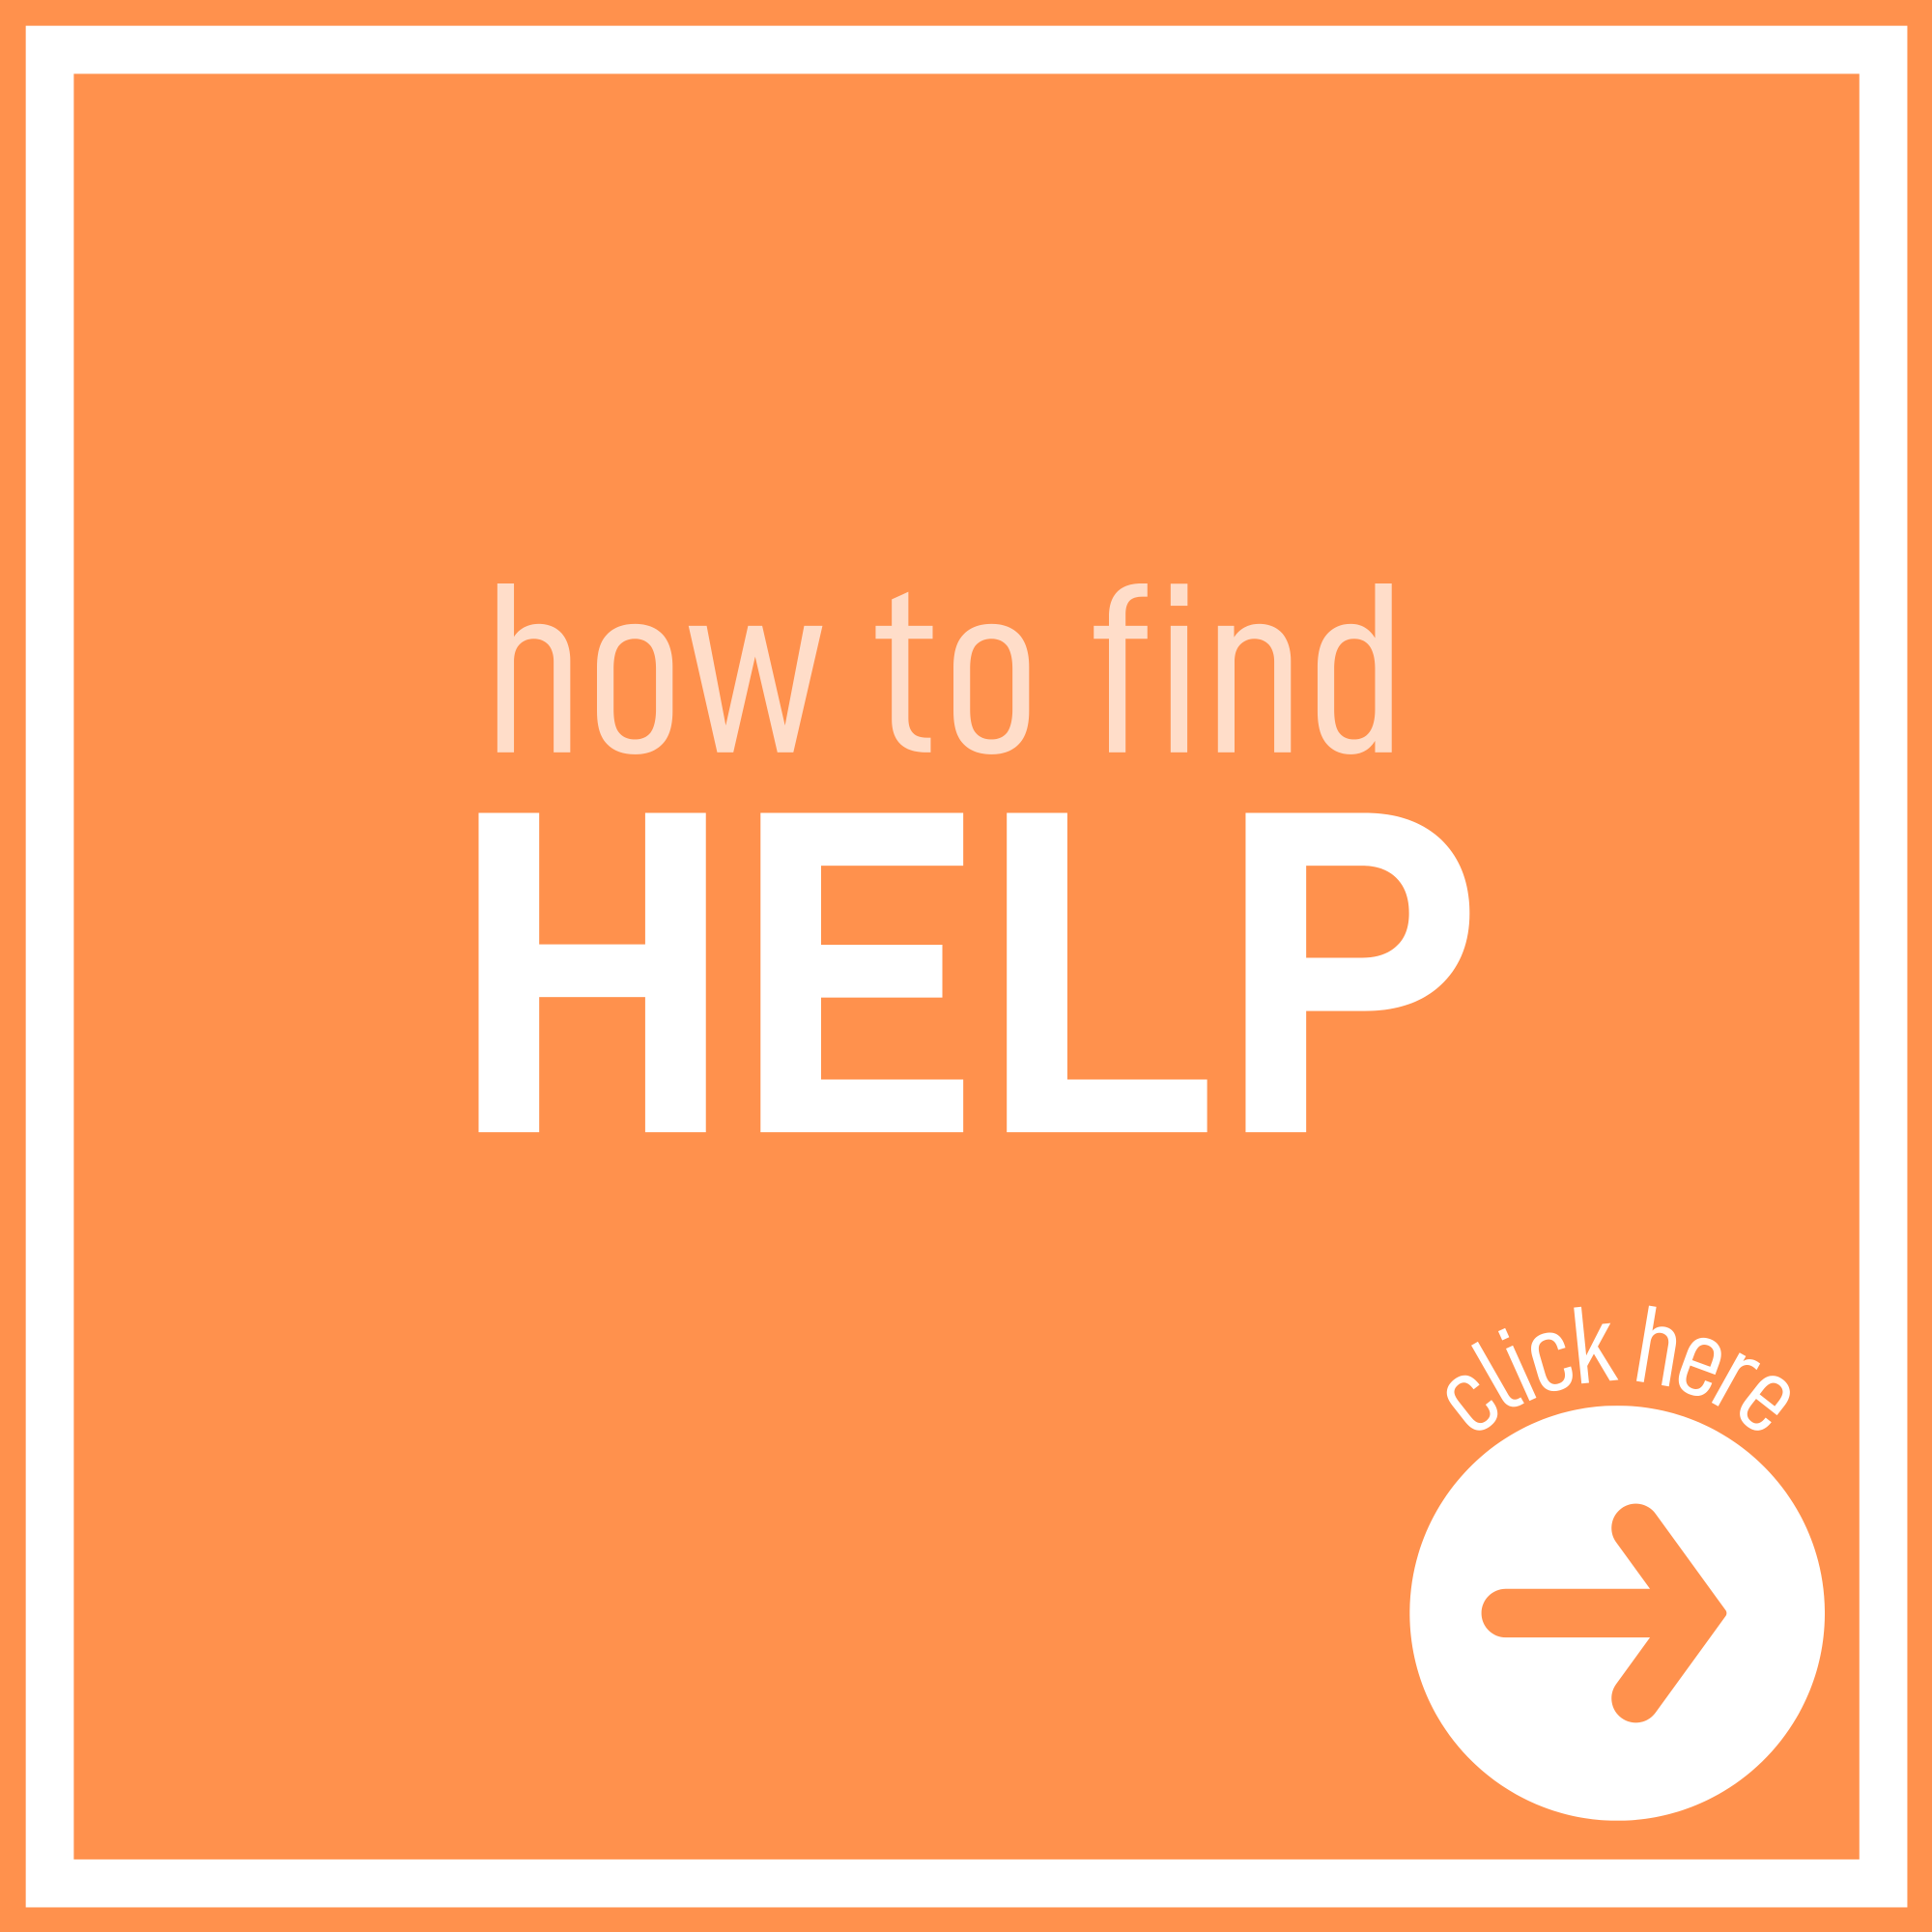 Orange square with white text that says "How to find help"